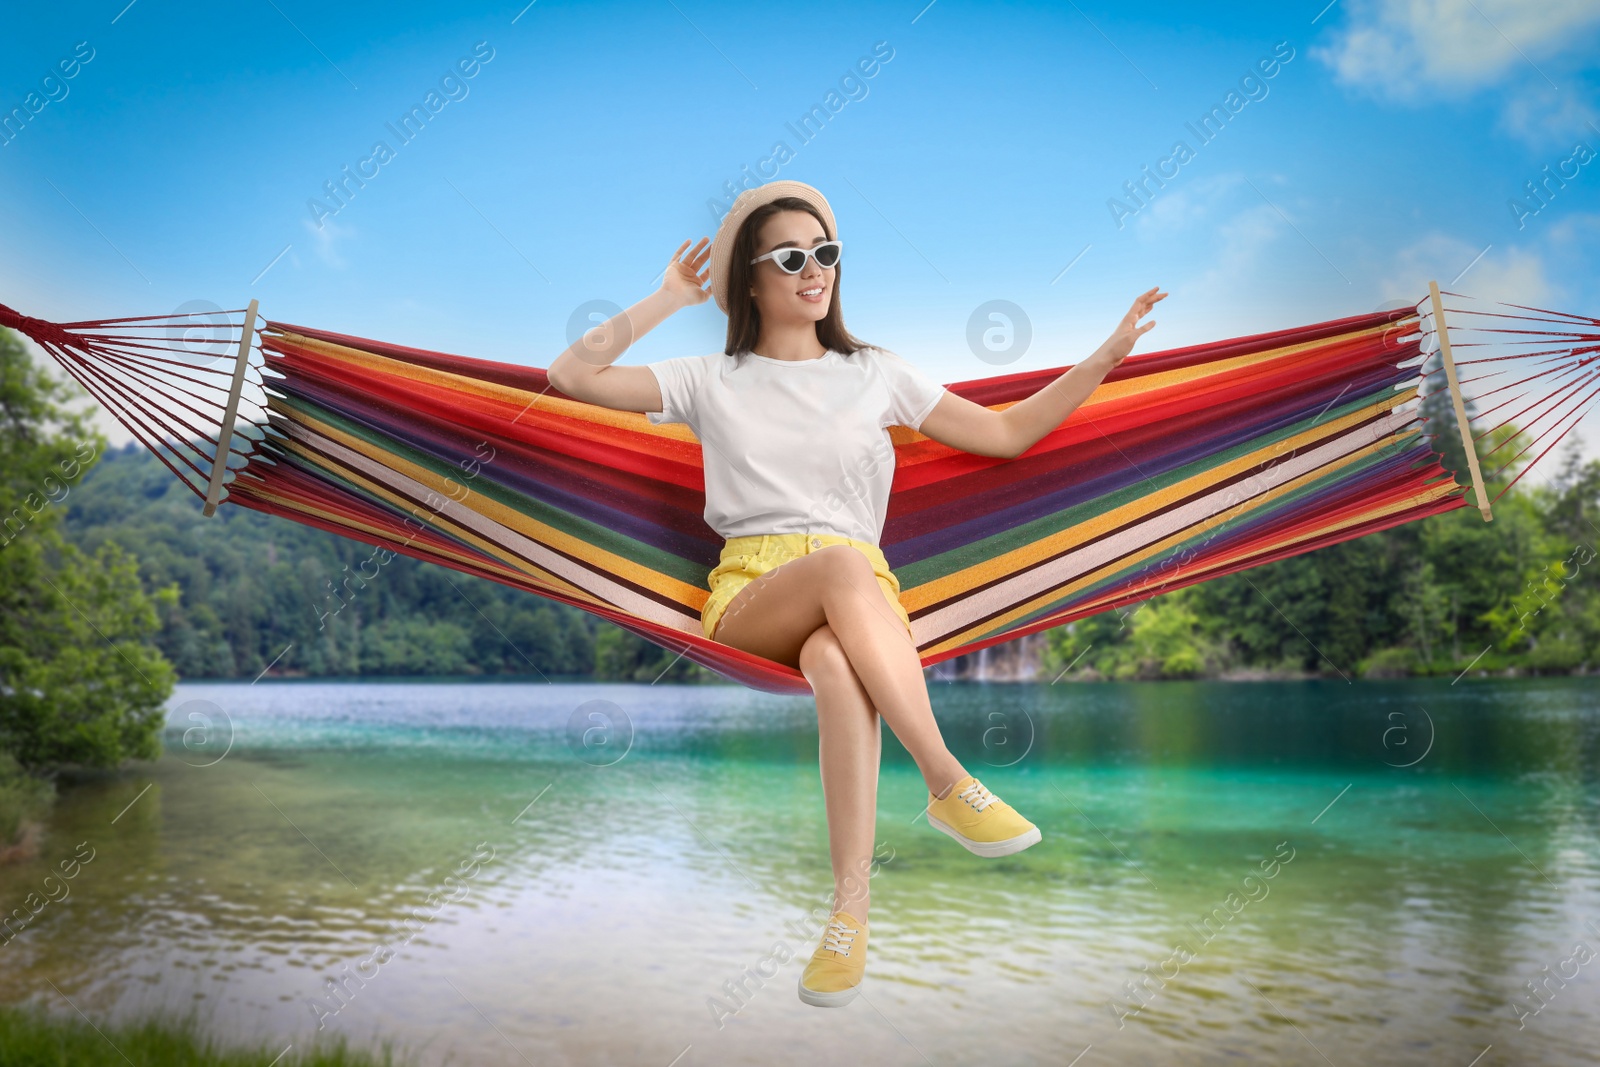 Image of Woman resting in hammock near river and mountains on sunny day 